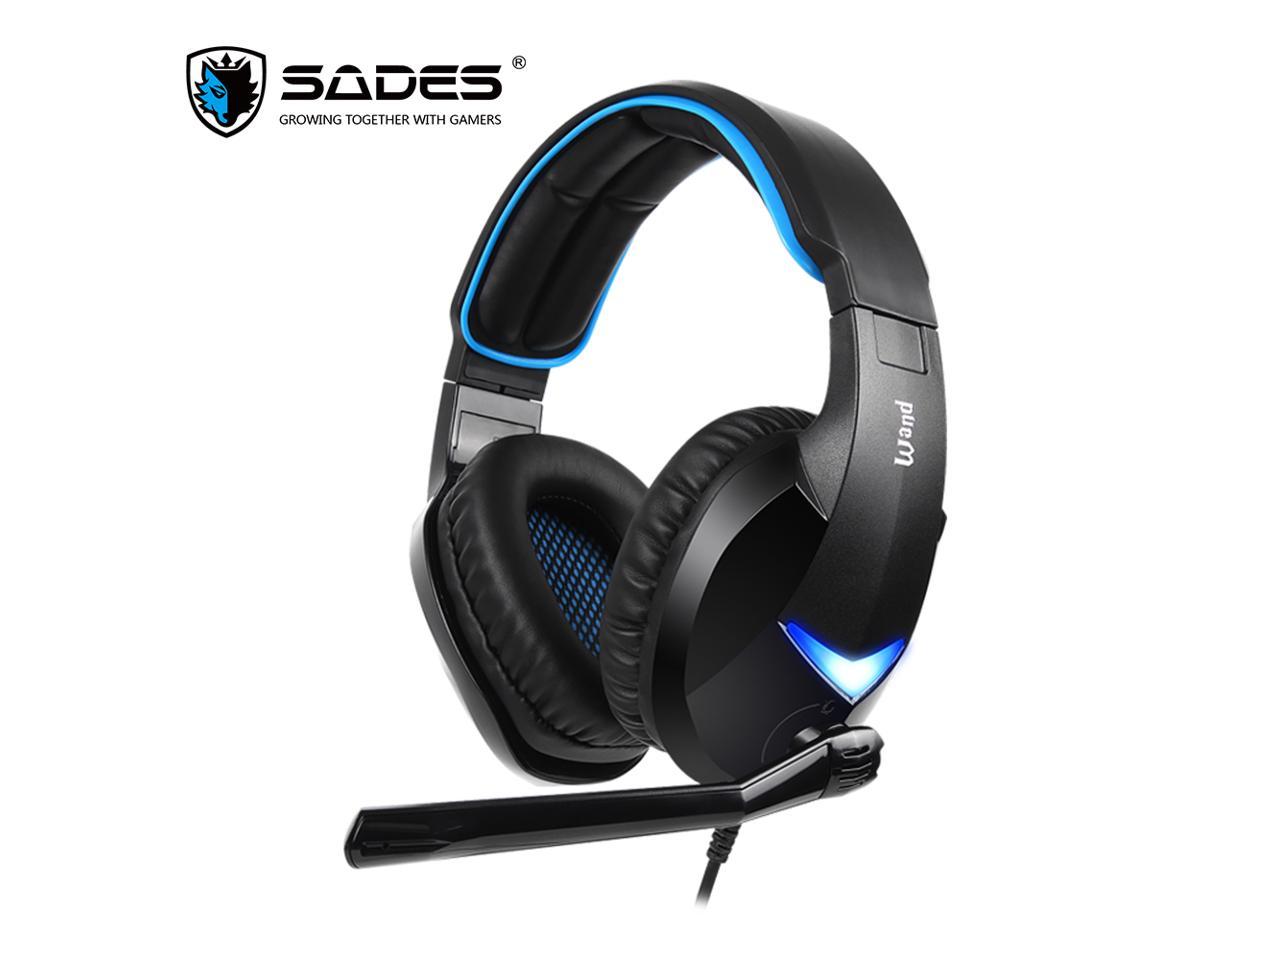 Sades Wand Gaming Headset Driver Free 7 1 Surround Audio Along Swivel To Mute Mic 2 Gaming Audio Modes For Pc Laptop Newegg Com